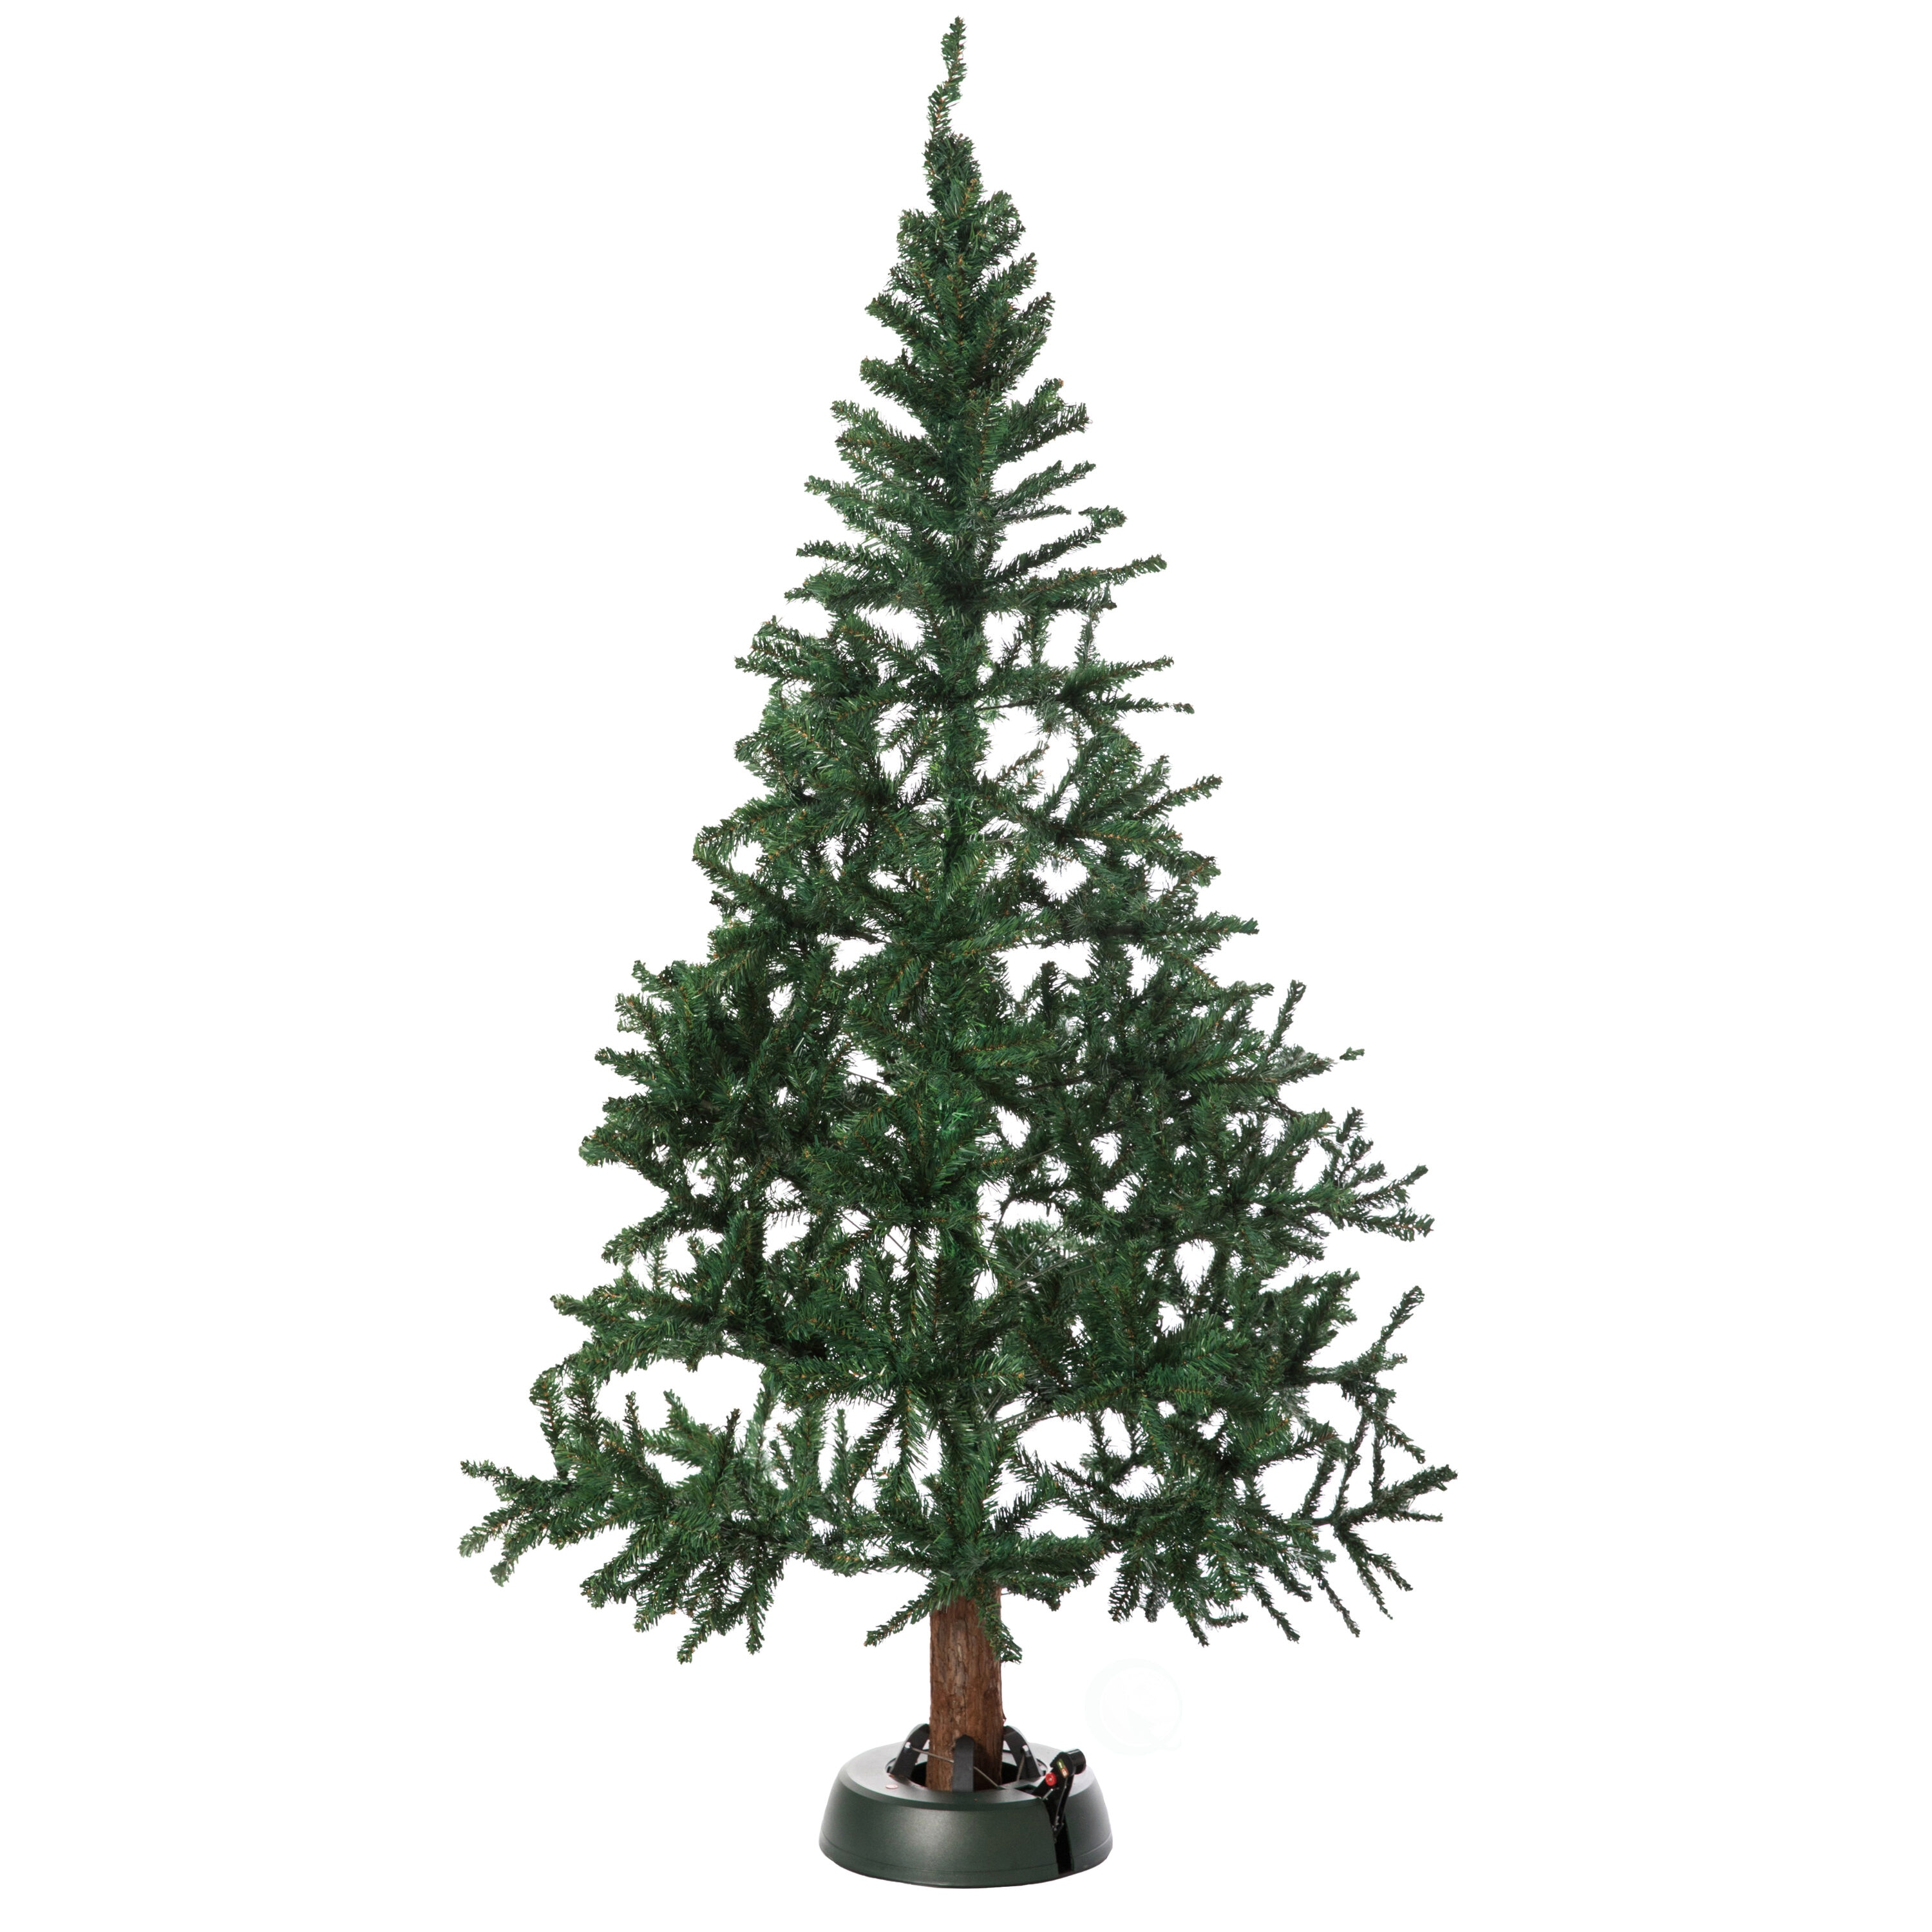 Gardenised 13.25-in Plastic 7-ft Tree Stand in the Christmas Tree ...